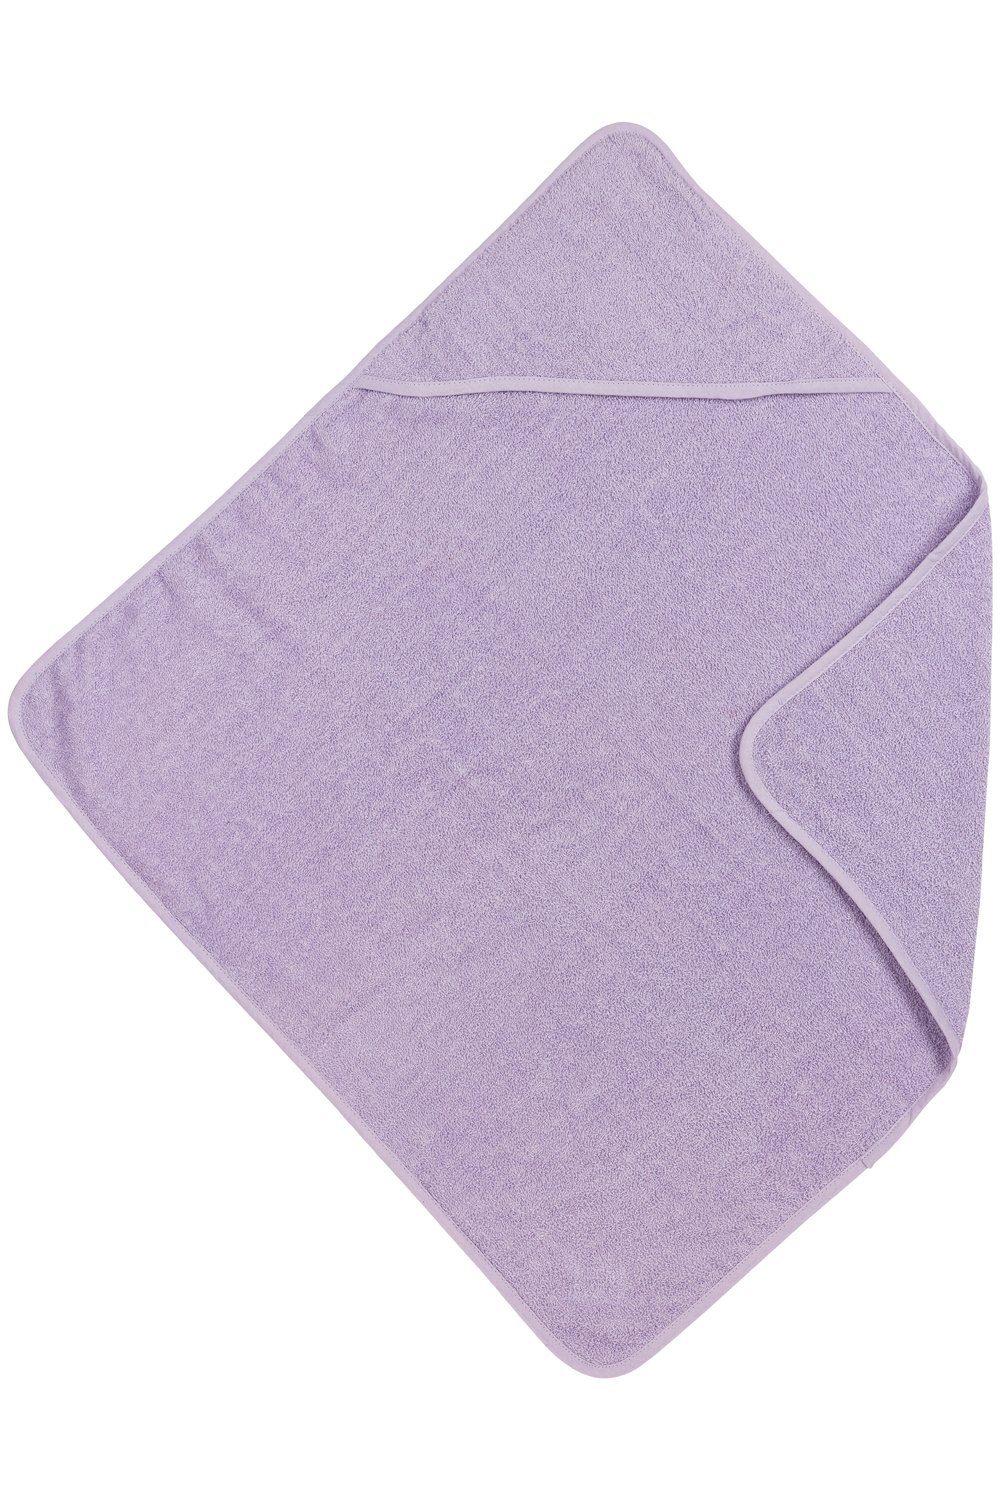 Meyco Baby Kapuzenhandtuch Uni Soft Lilac, Frottee (1-St), 75x75cm